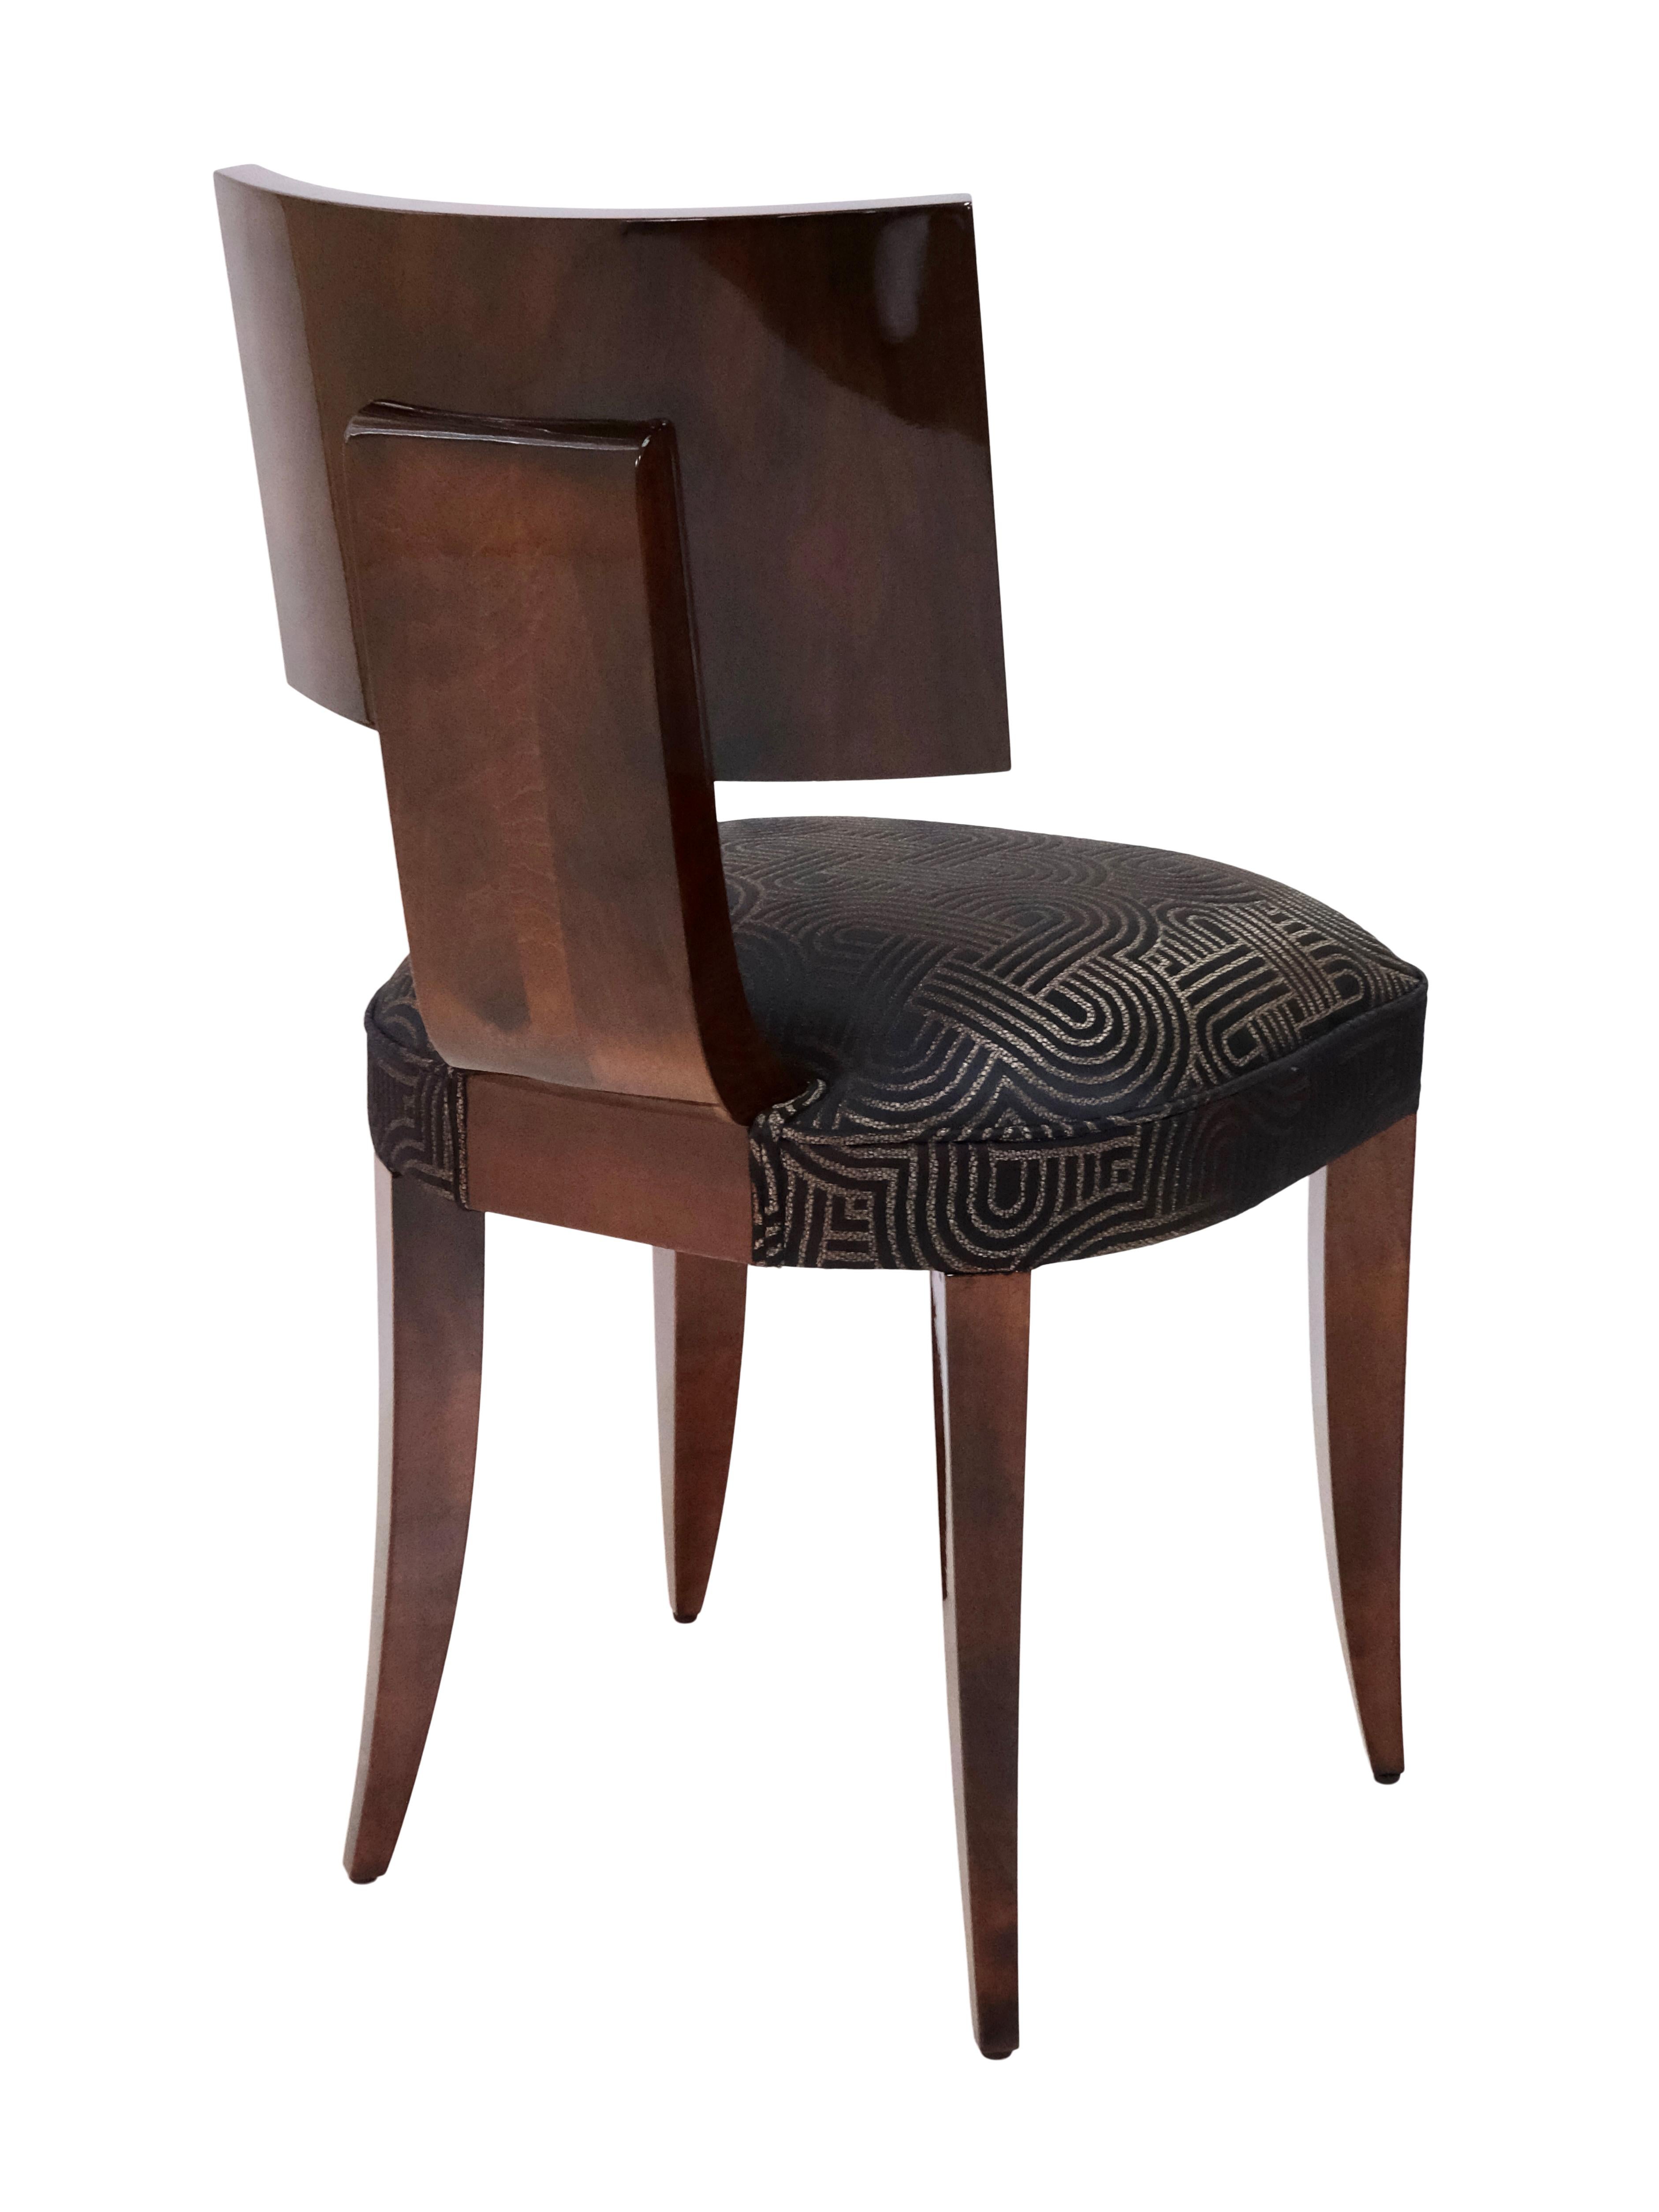 Mid-20th Century Six Modernist Art Deco Dining Chairs from 1930s France